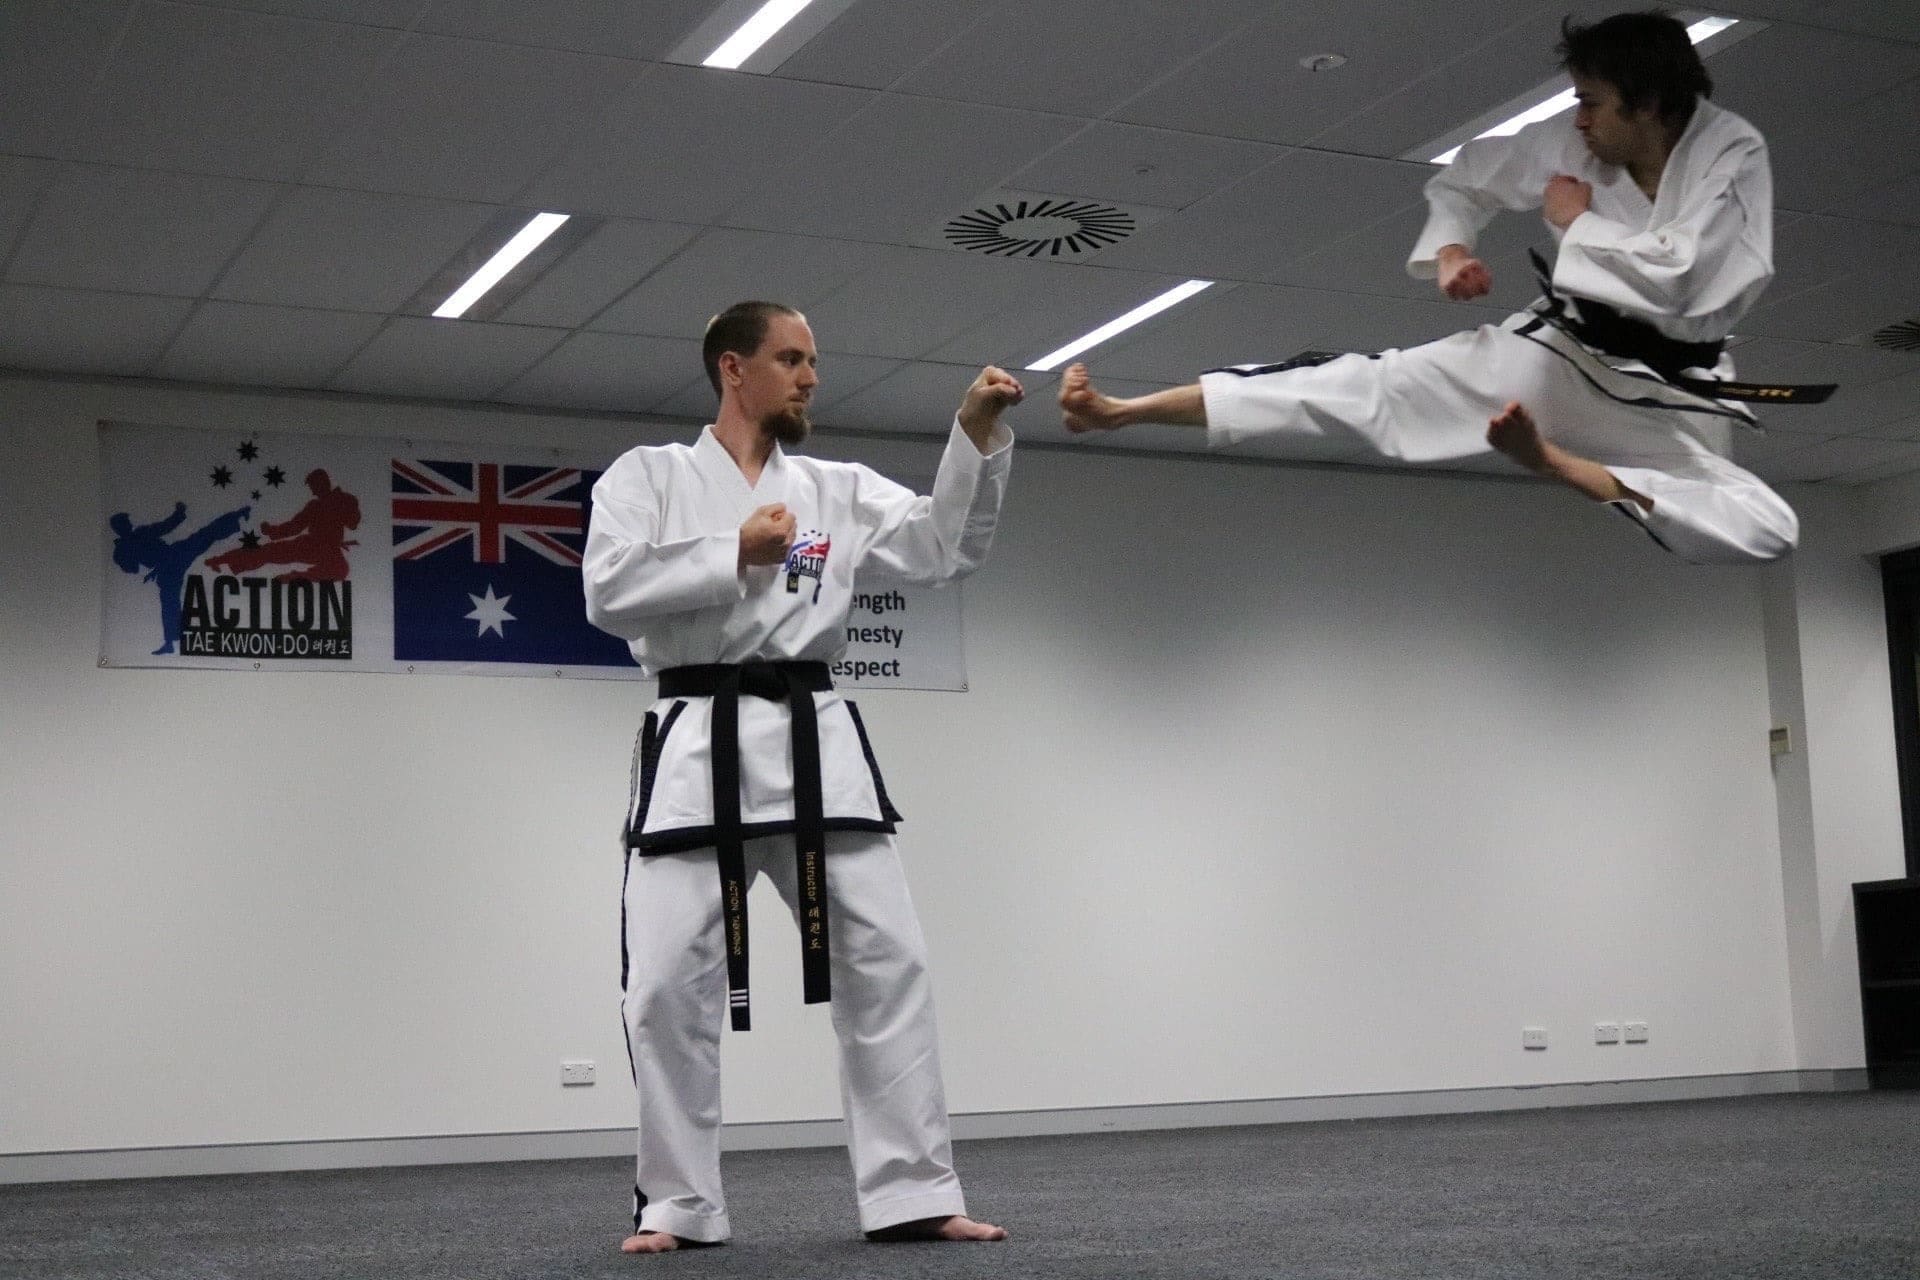 Black belt adult and instructor students of action tae kwon do performing a flying side kick.